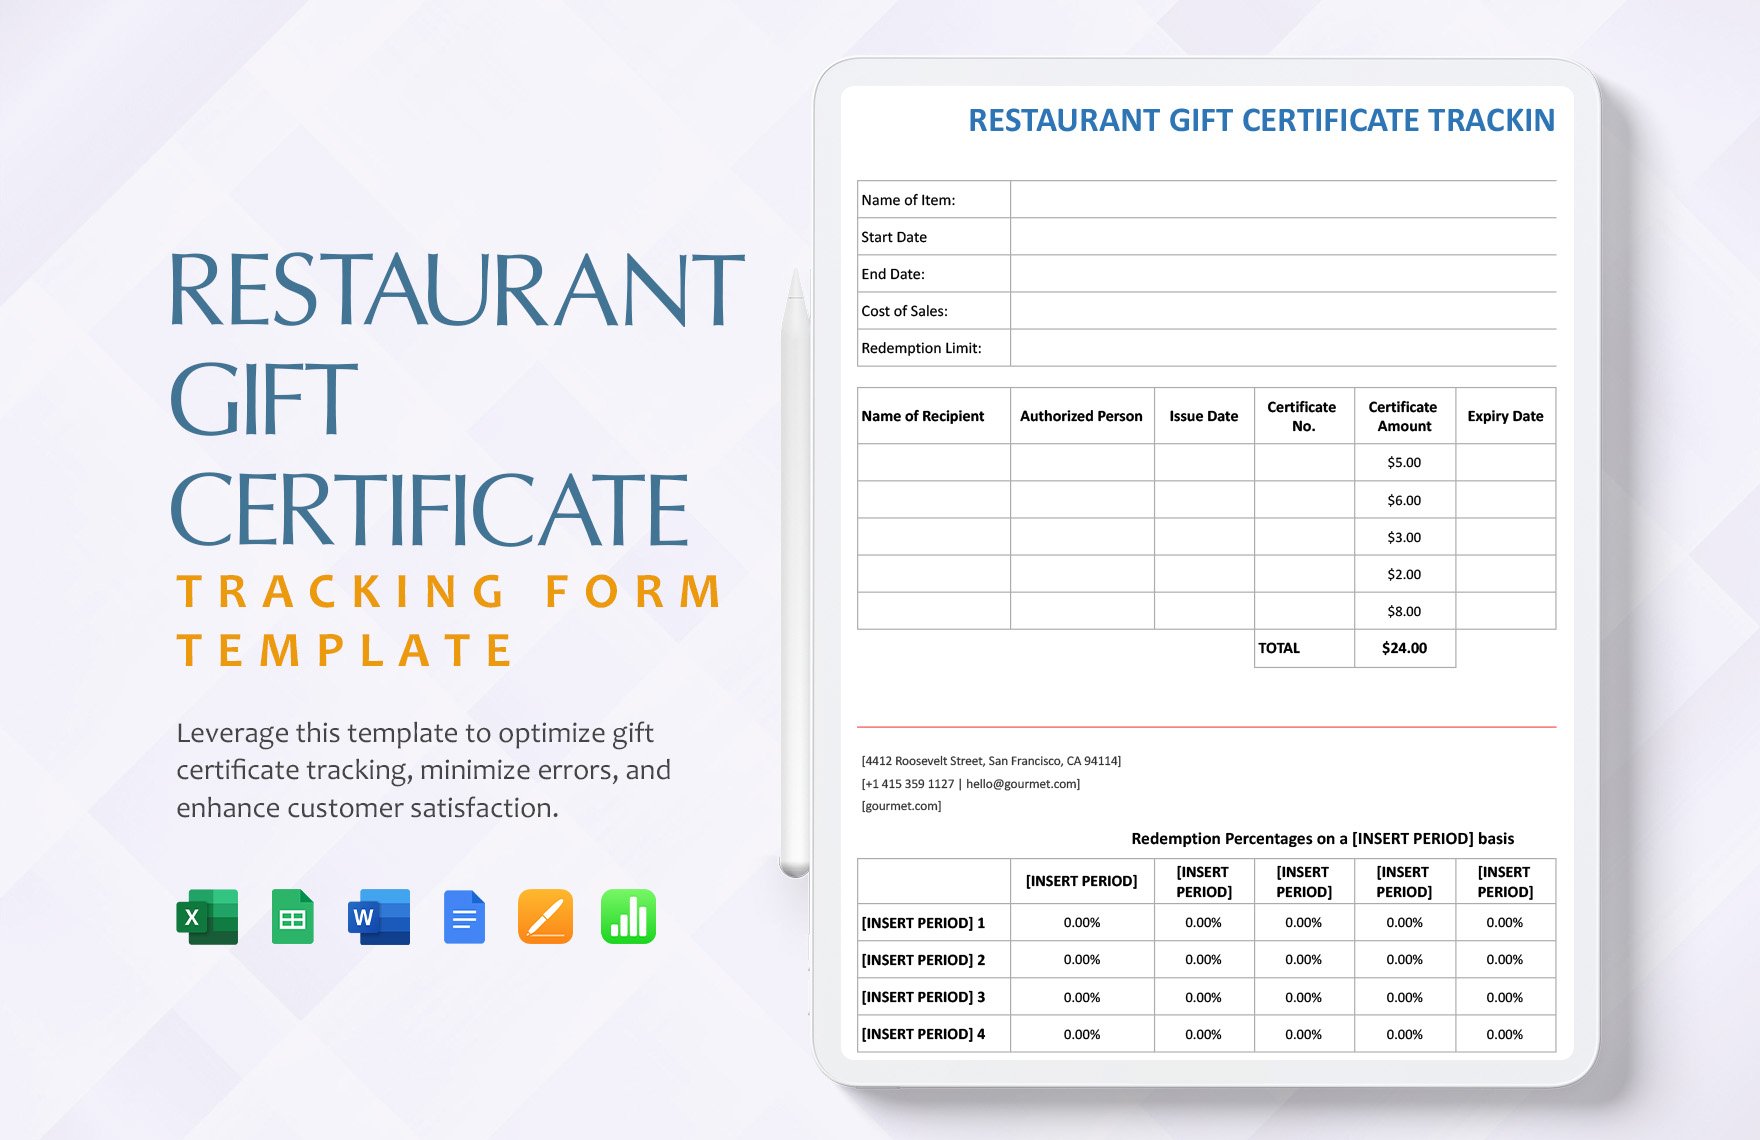 Restaurant Gift Certificate Tracking Form Template in Word, Google Docs, Excel, Google Sheets, Apple Pages, Apple Numbers